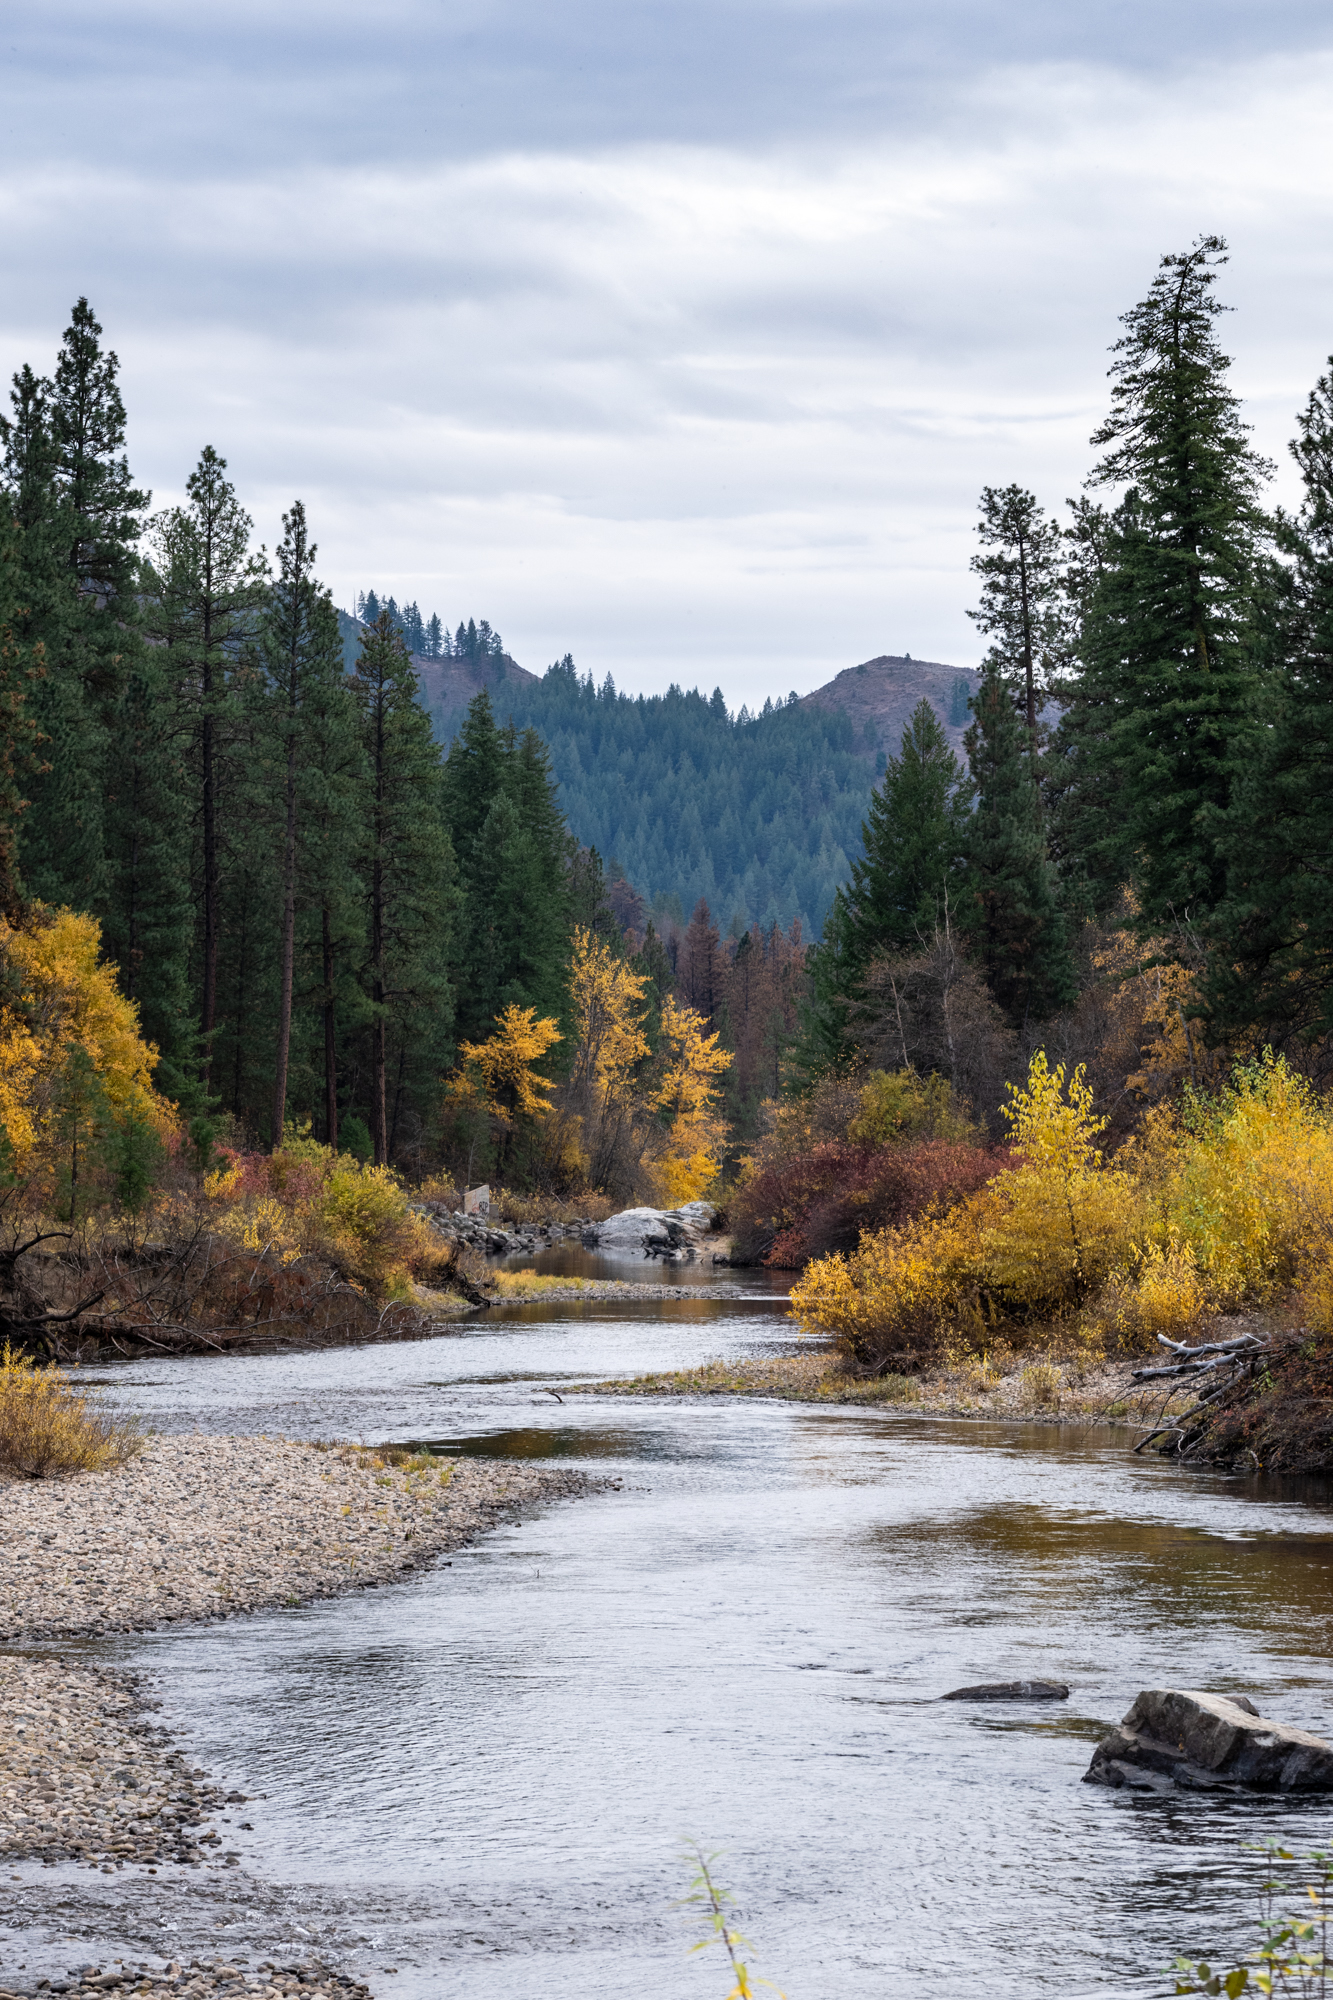 Chewuch River during the fall in the Methow Valley